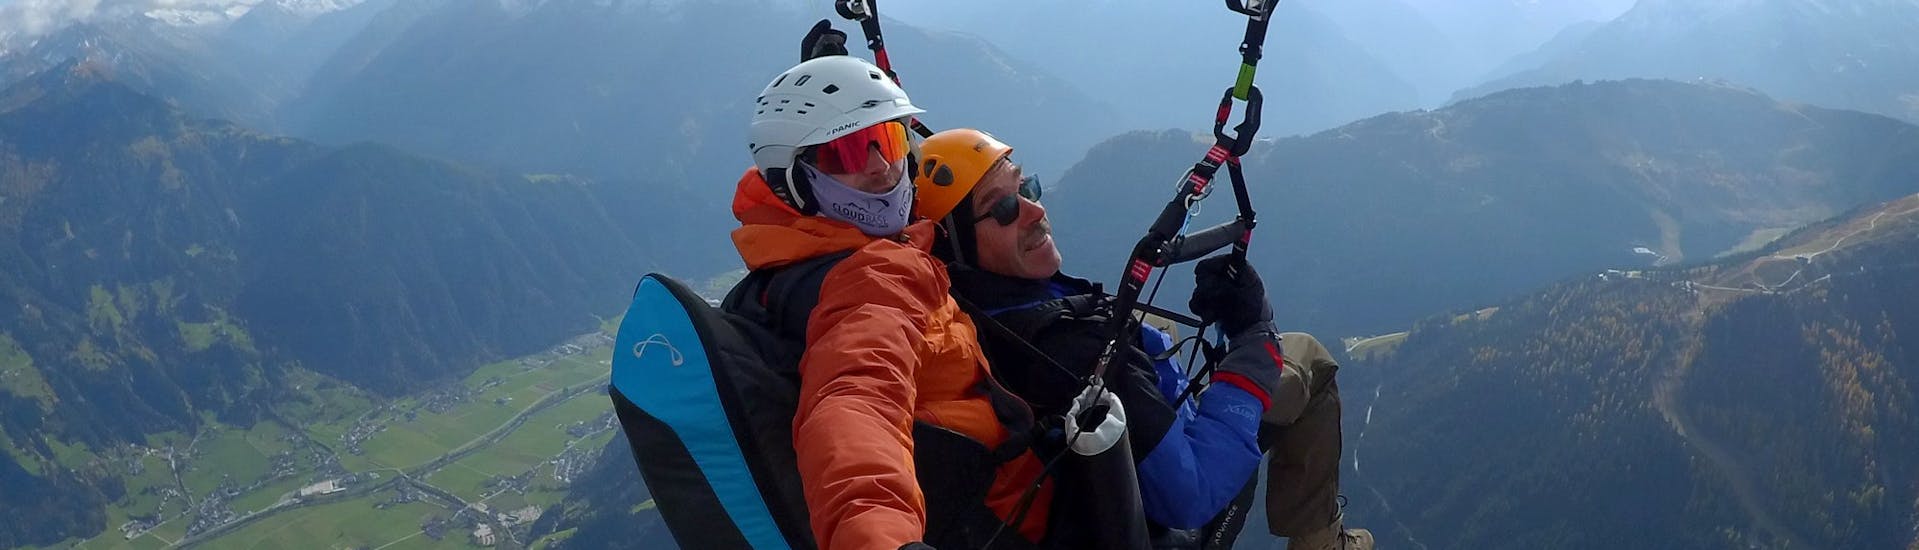 A customer and his pilot look happily into the camera as they glide through the air during their tandem paragliding superior flight in the Zillertal by AIRflow Tandem Paragliding Zillertal.